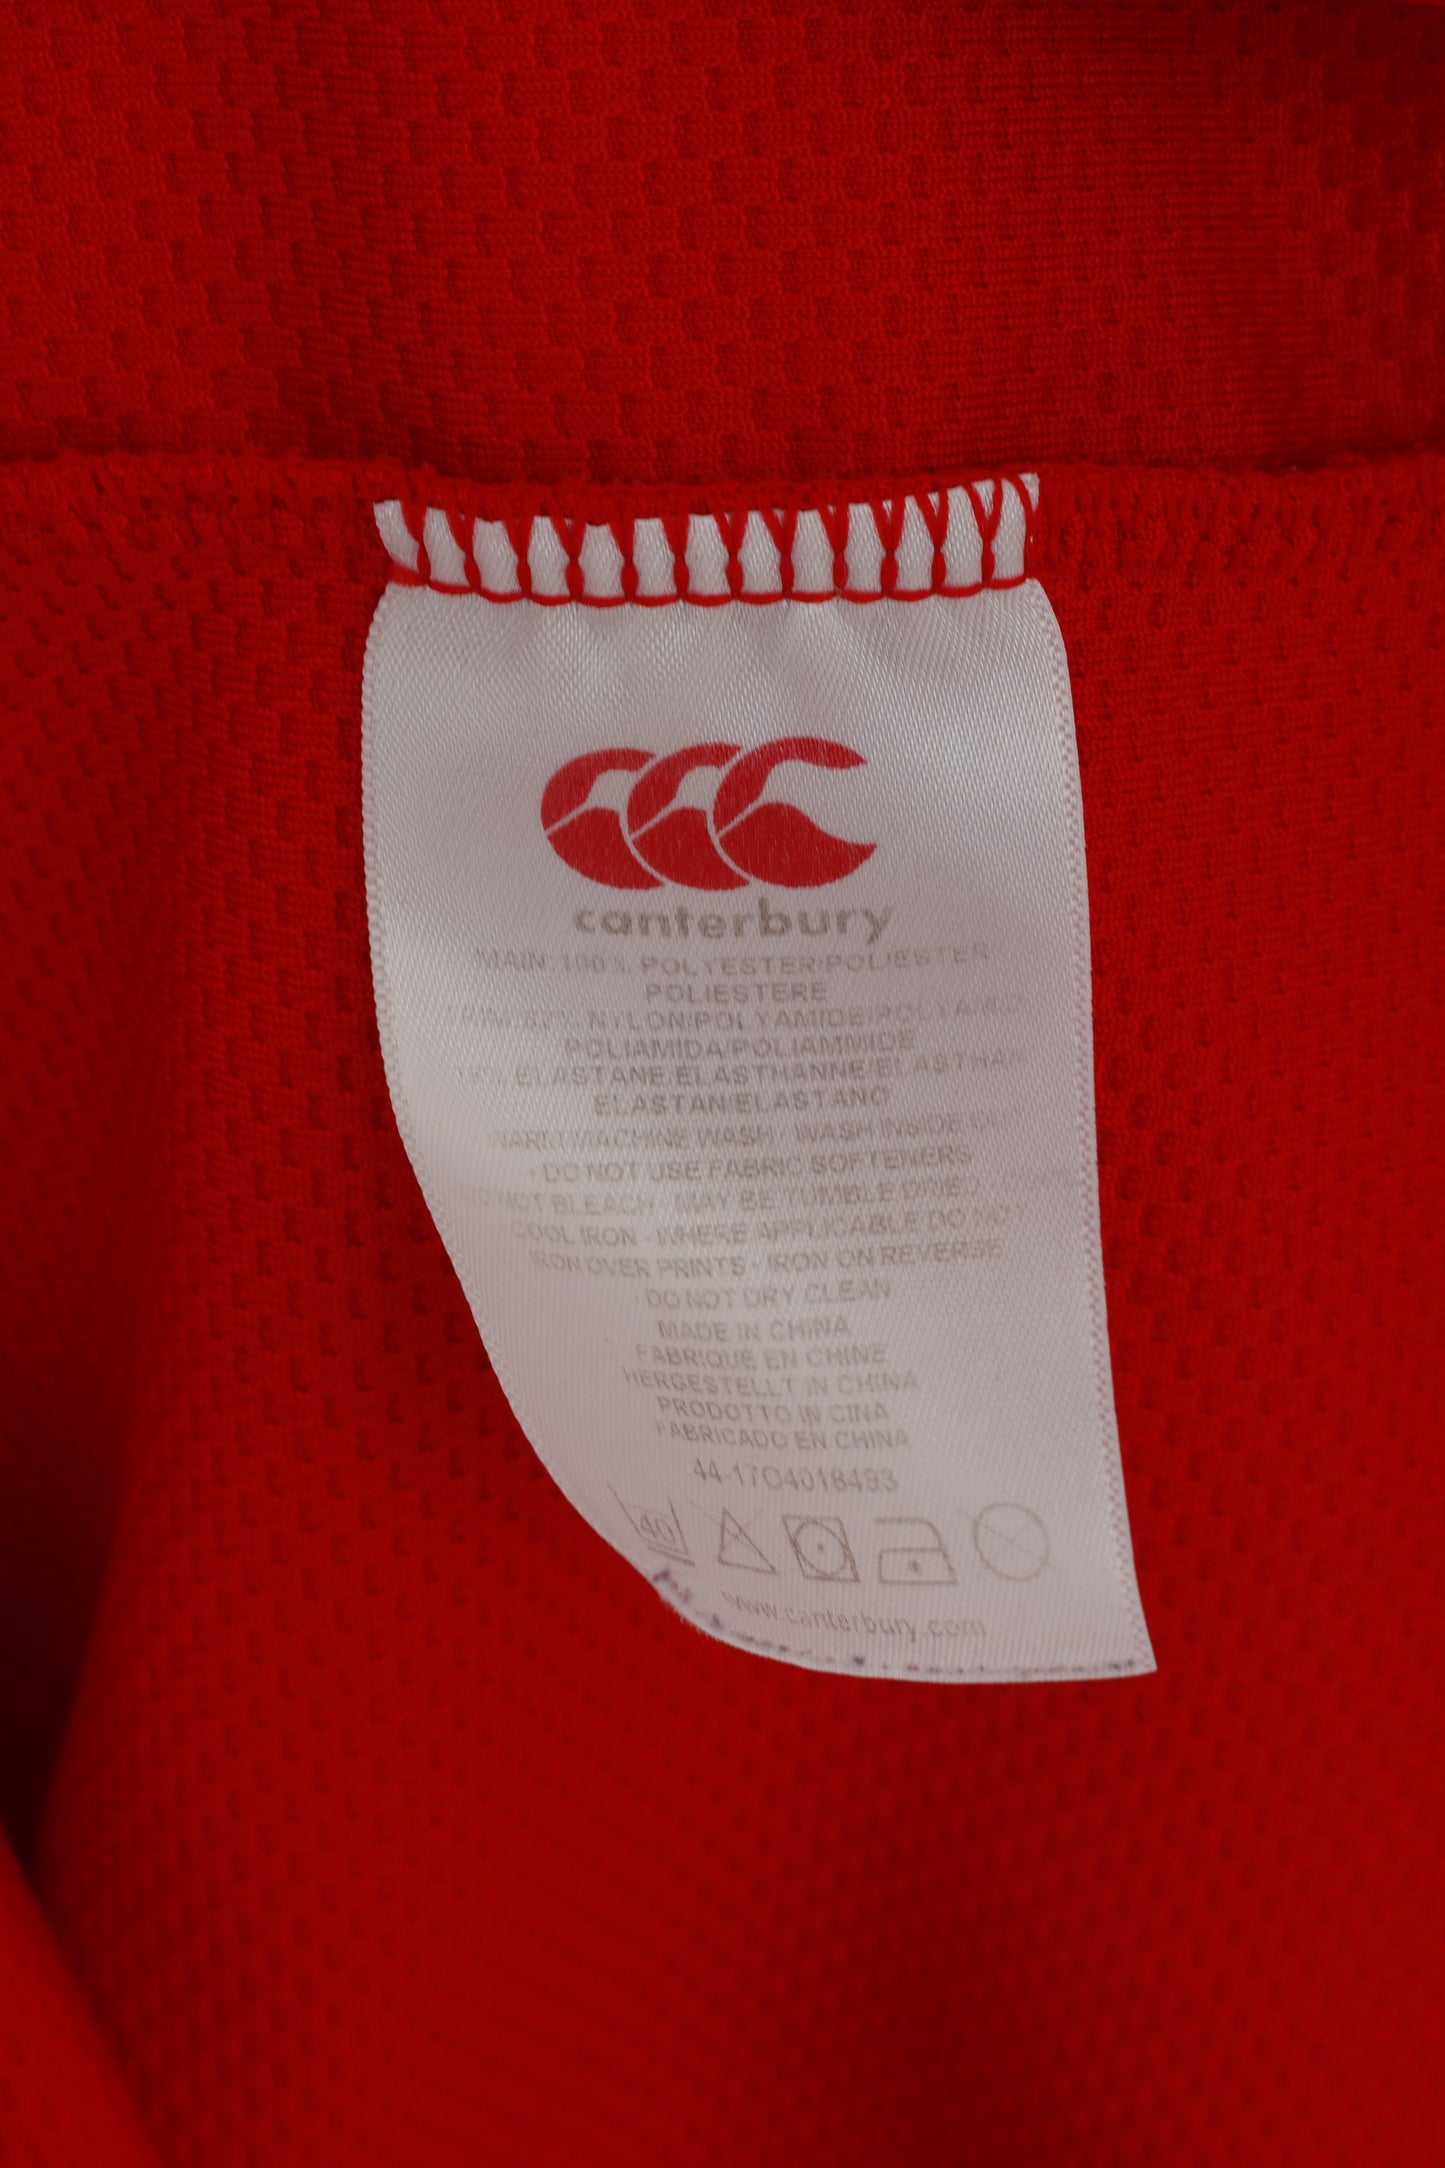 Canterbury Boys 12 Age Shirt Rouge Rugby O2 Angleterre Maillot sous Licence